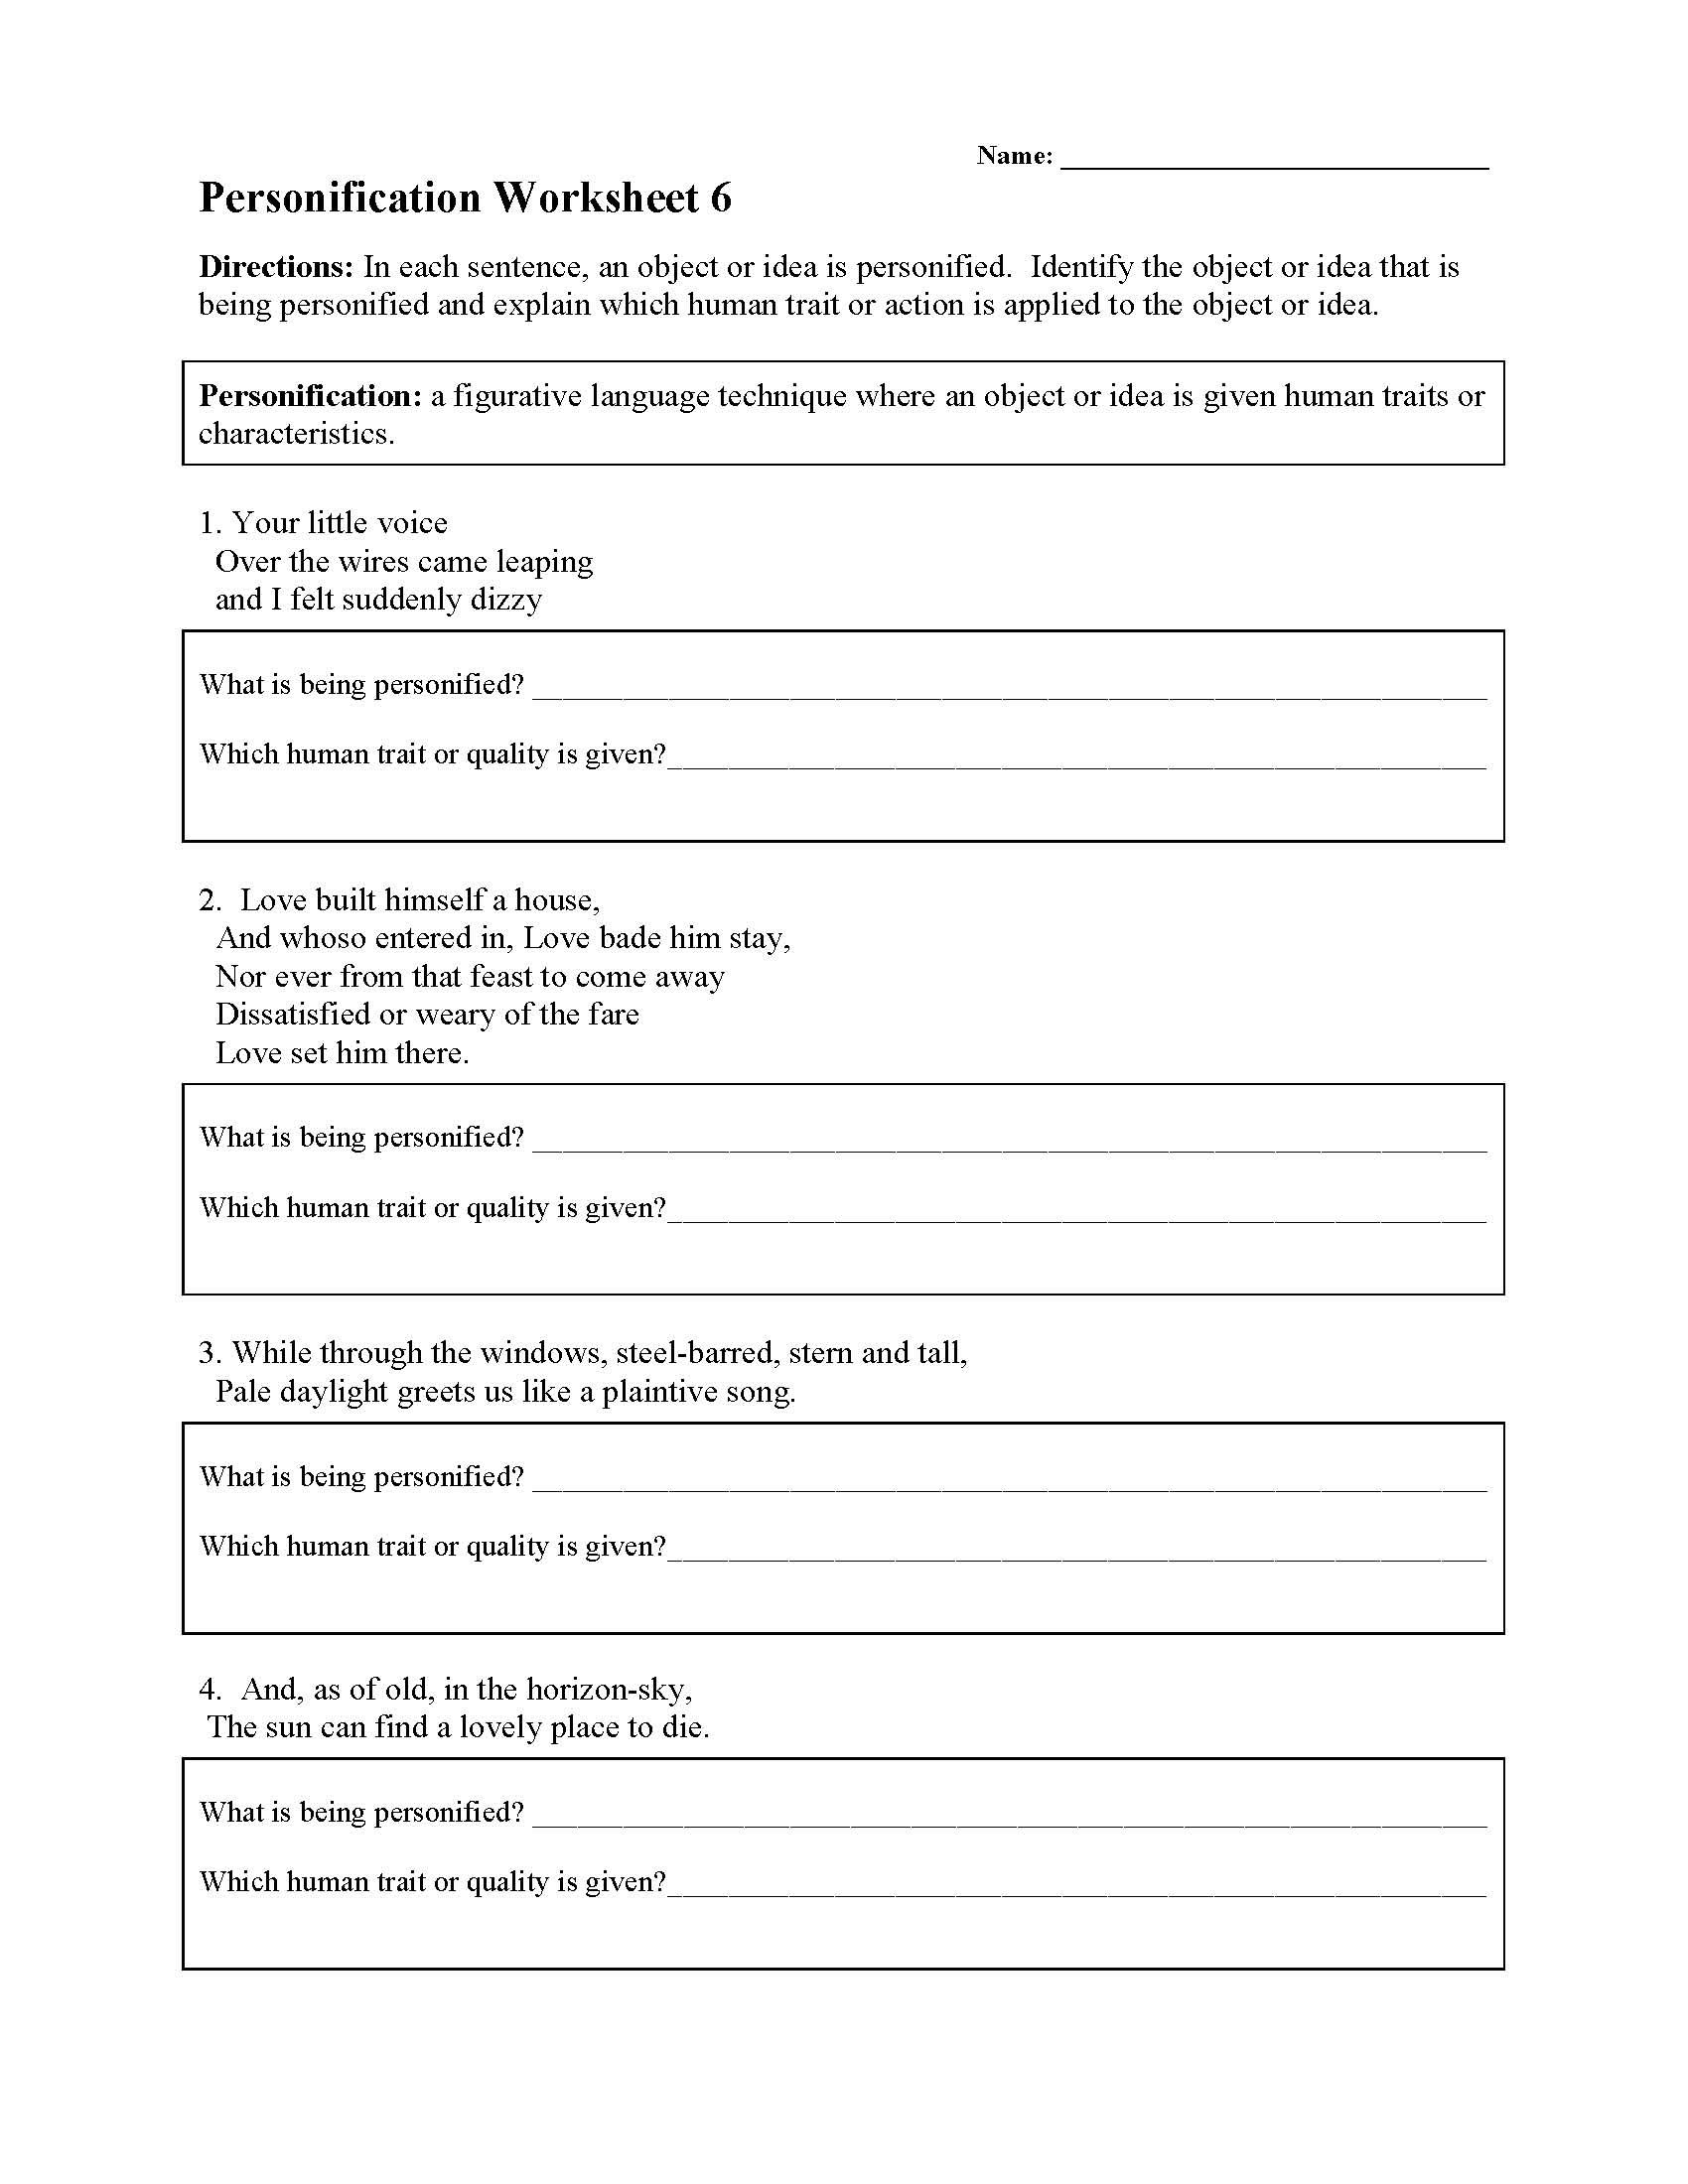 Personification Worksheet 6 Preview